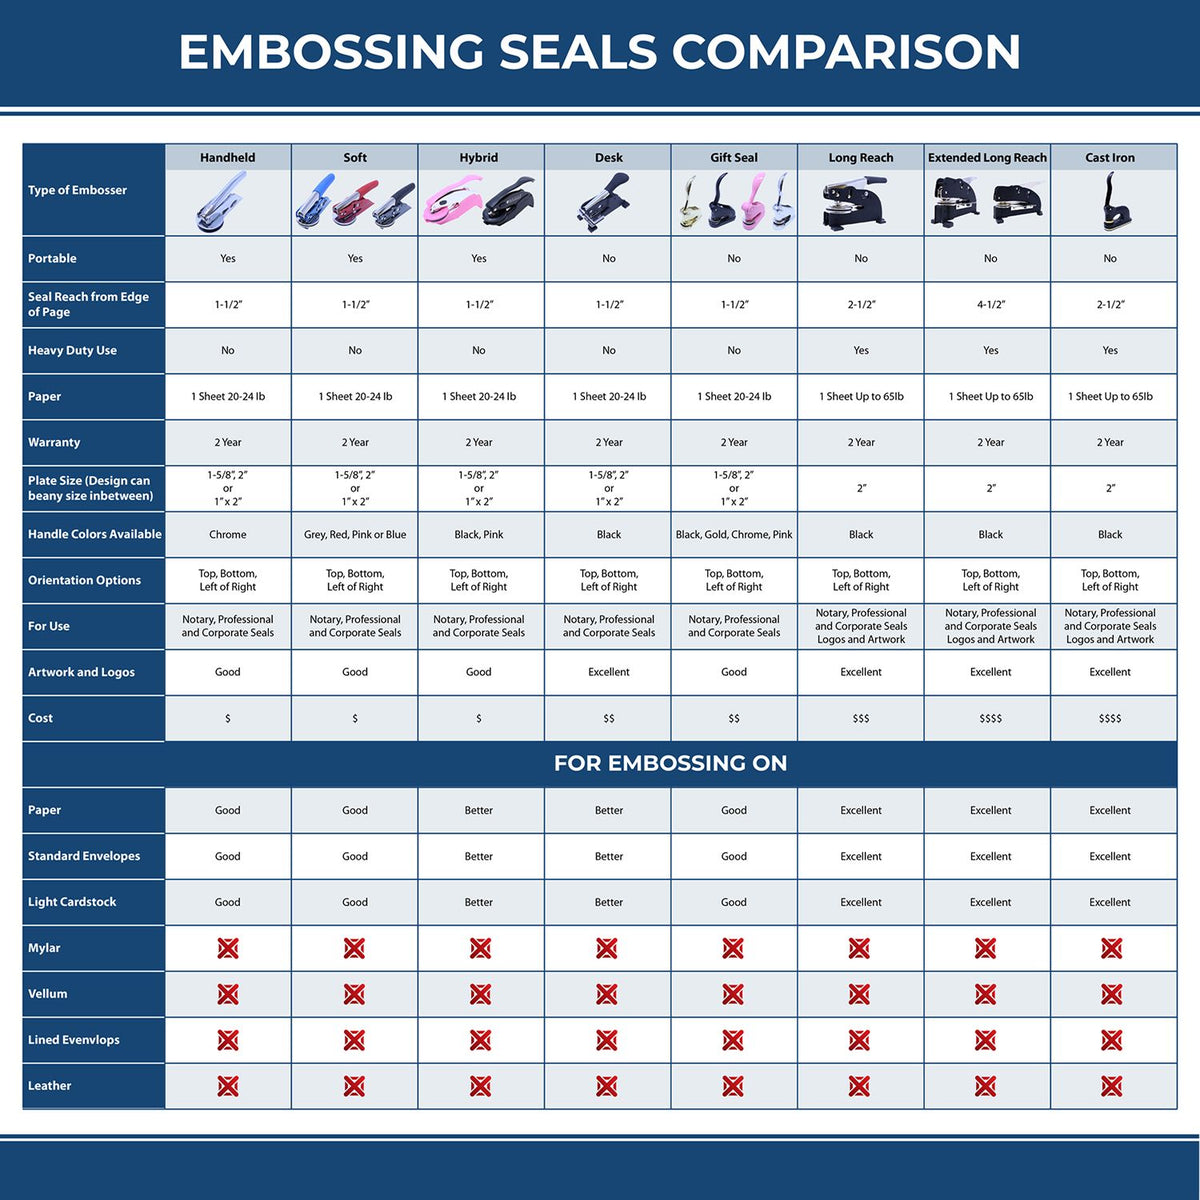 A comparison chart for the different types of mount models available for the Handheld Ohio Professional Geologist Embosser